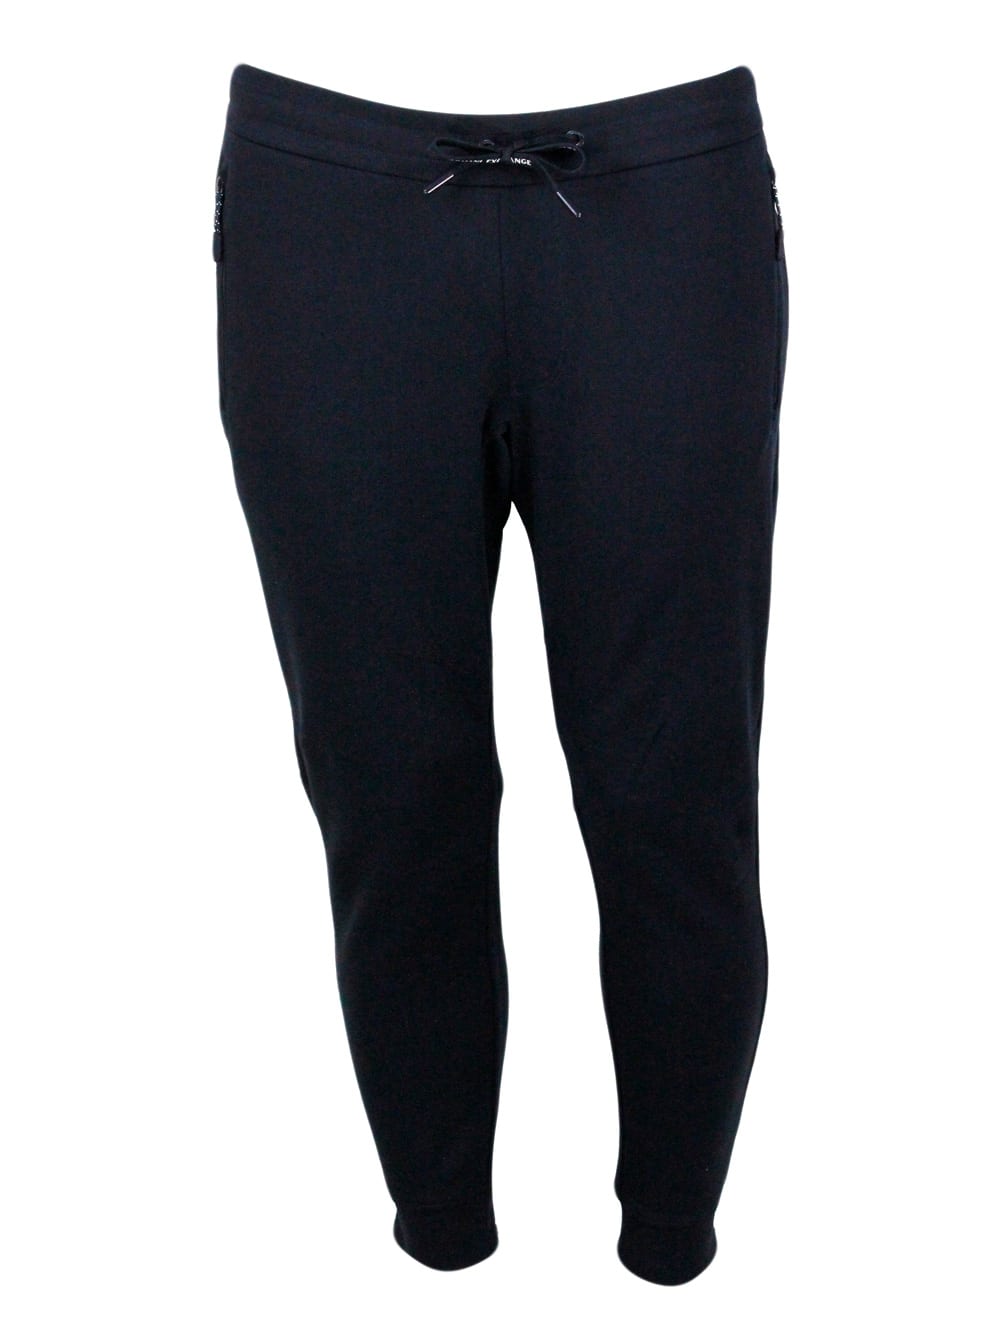 Shop Armani Collezioni Cotton Fleece Jogging Trousers With Drawstring At The Waist And Cuff At The Bottom In Blu